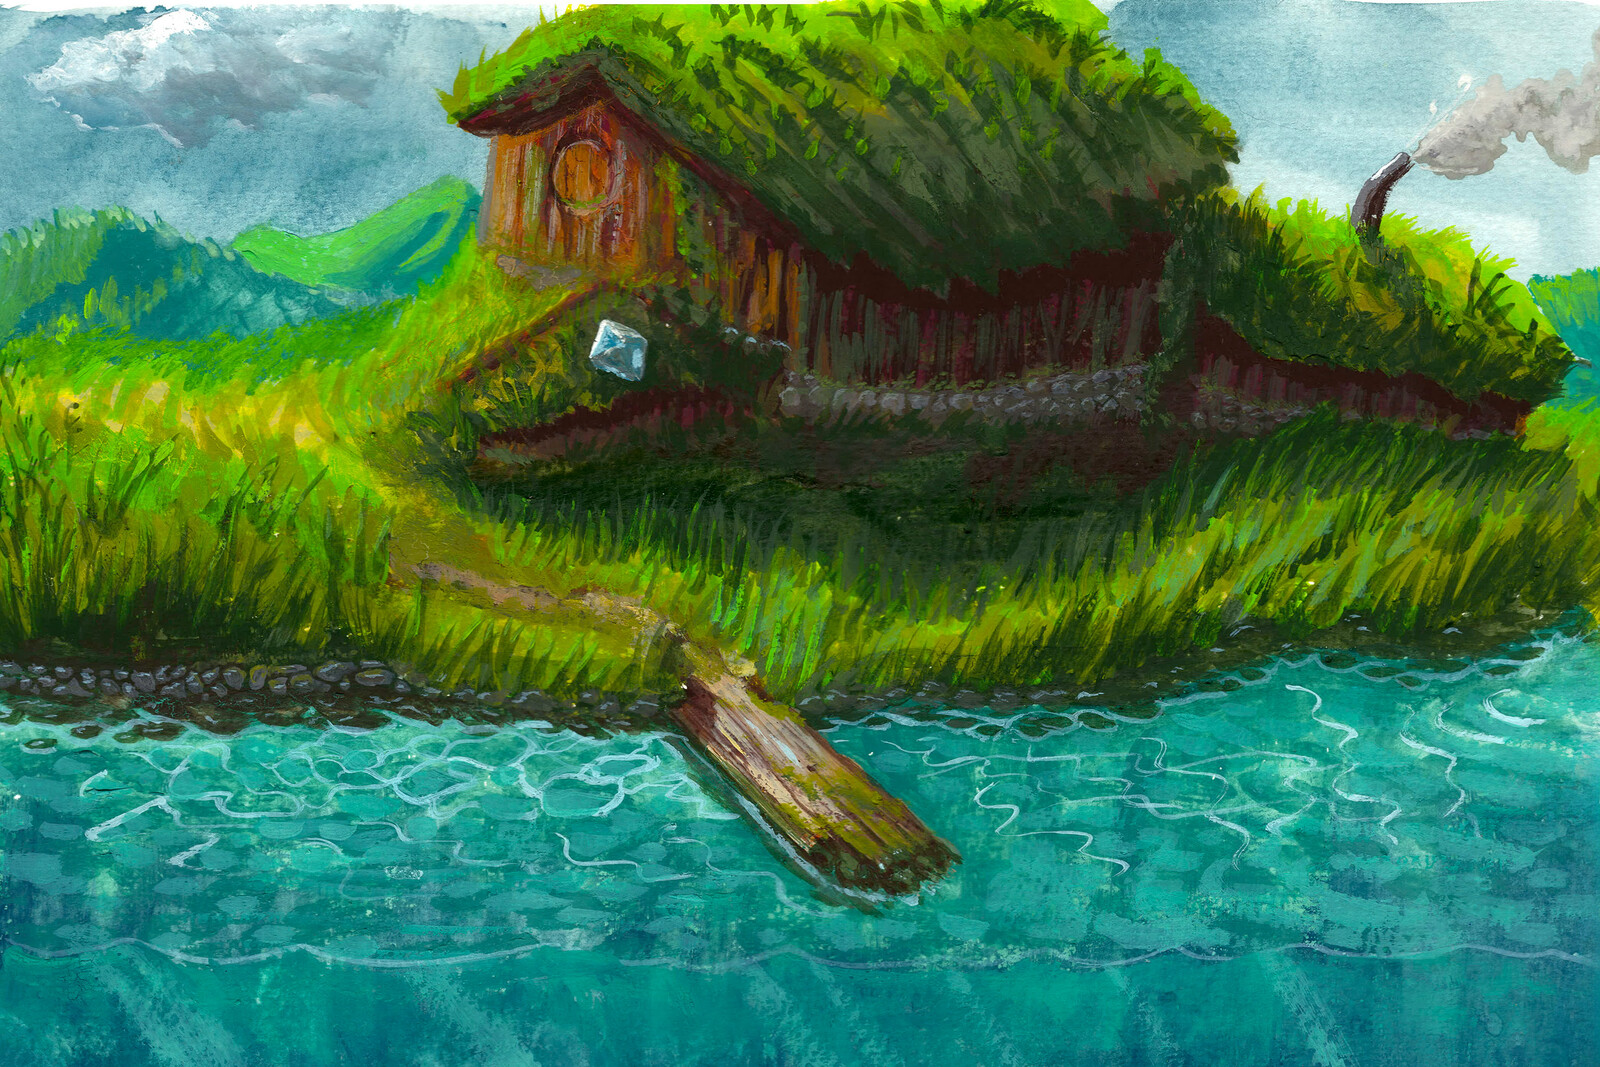 Shack by the Lake in Gouache